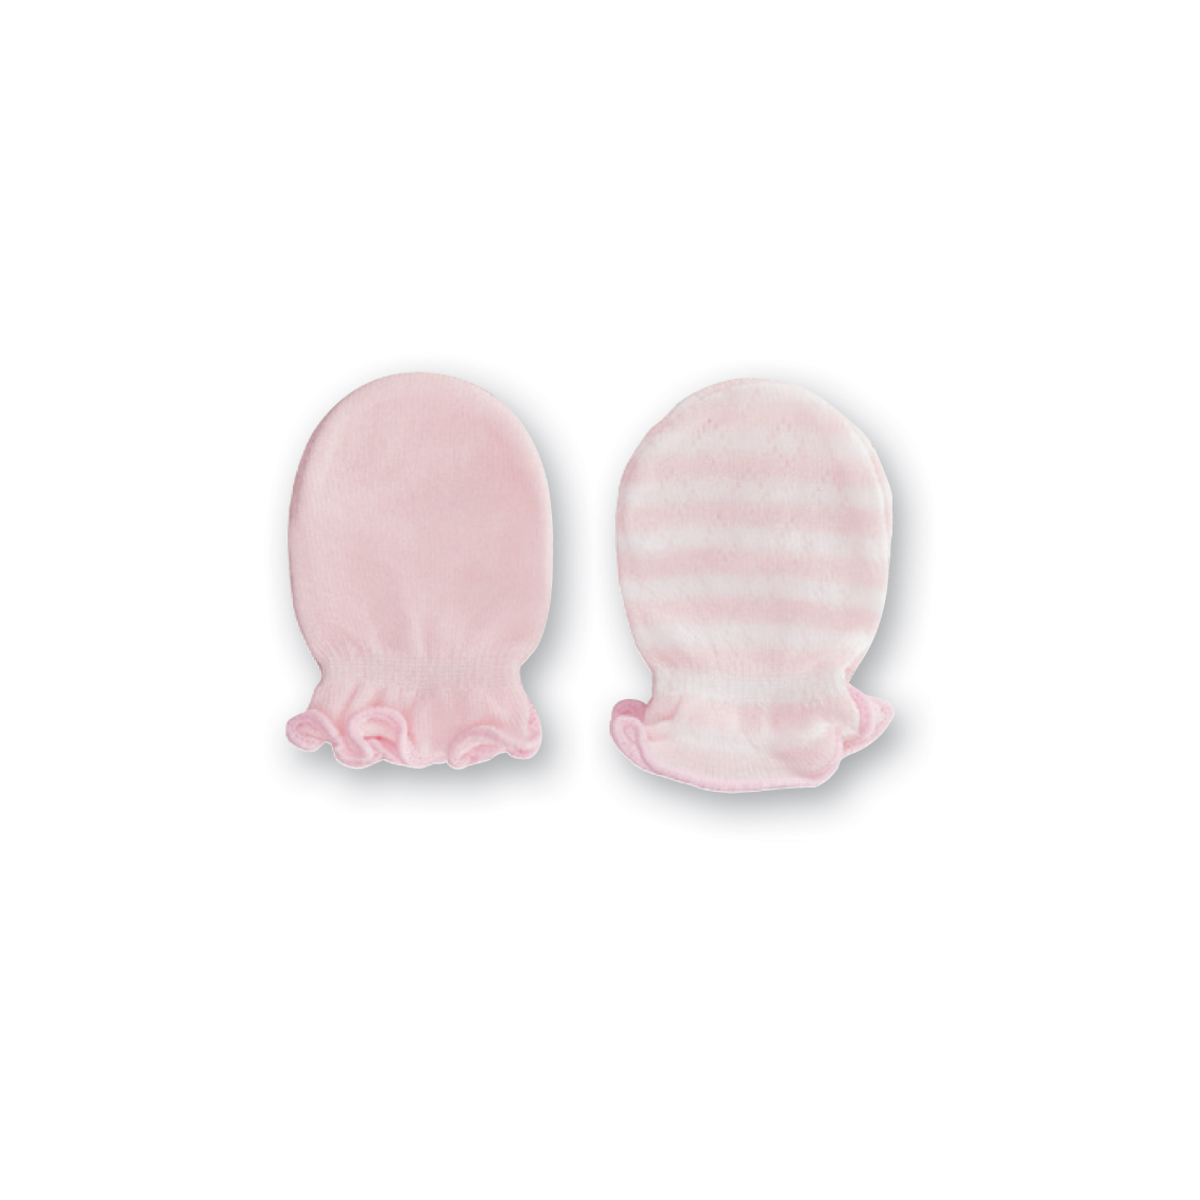 Playette Playette 2 Pack Bamboo Mittens